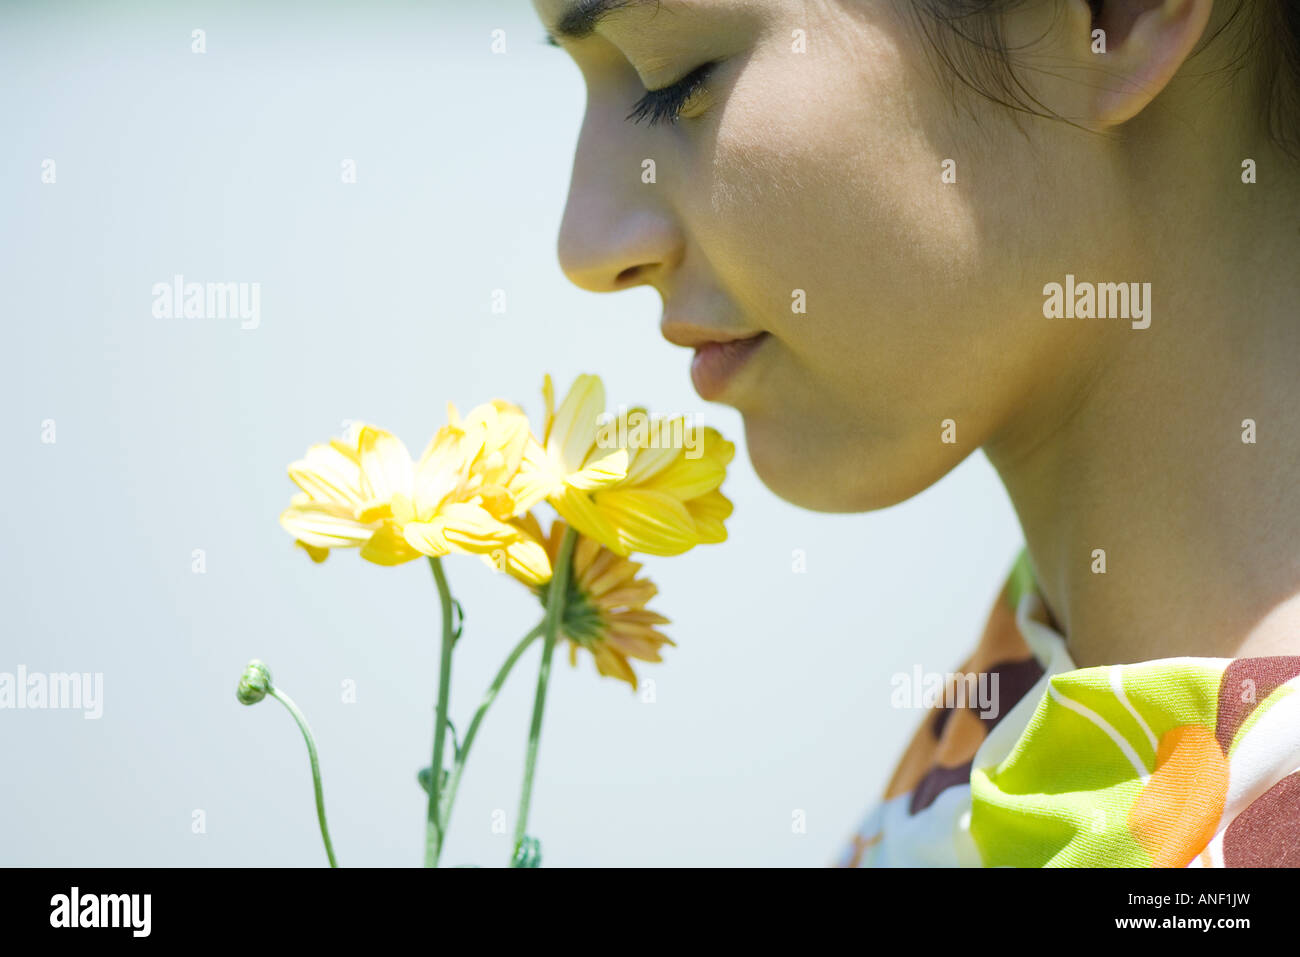 Young woman smelling flowers, profile, close-up Stock Photo